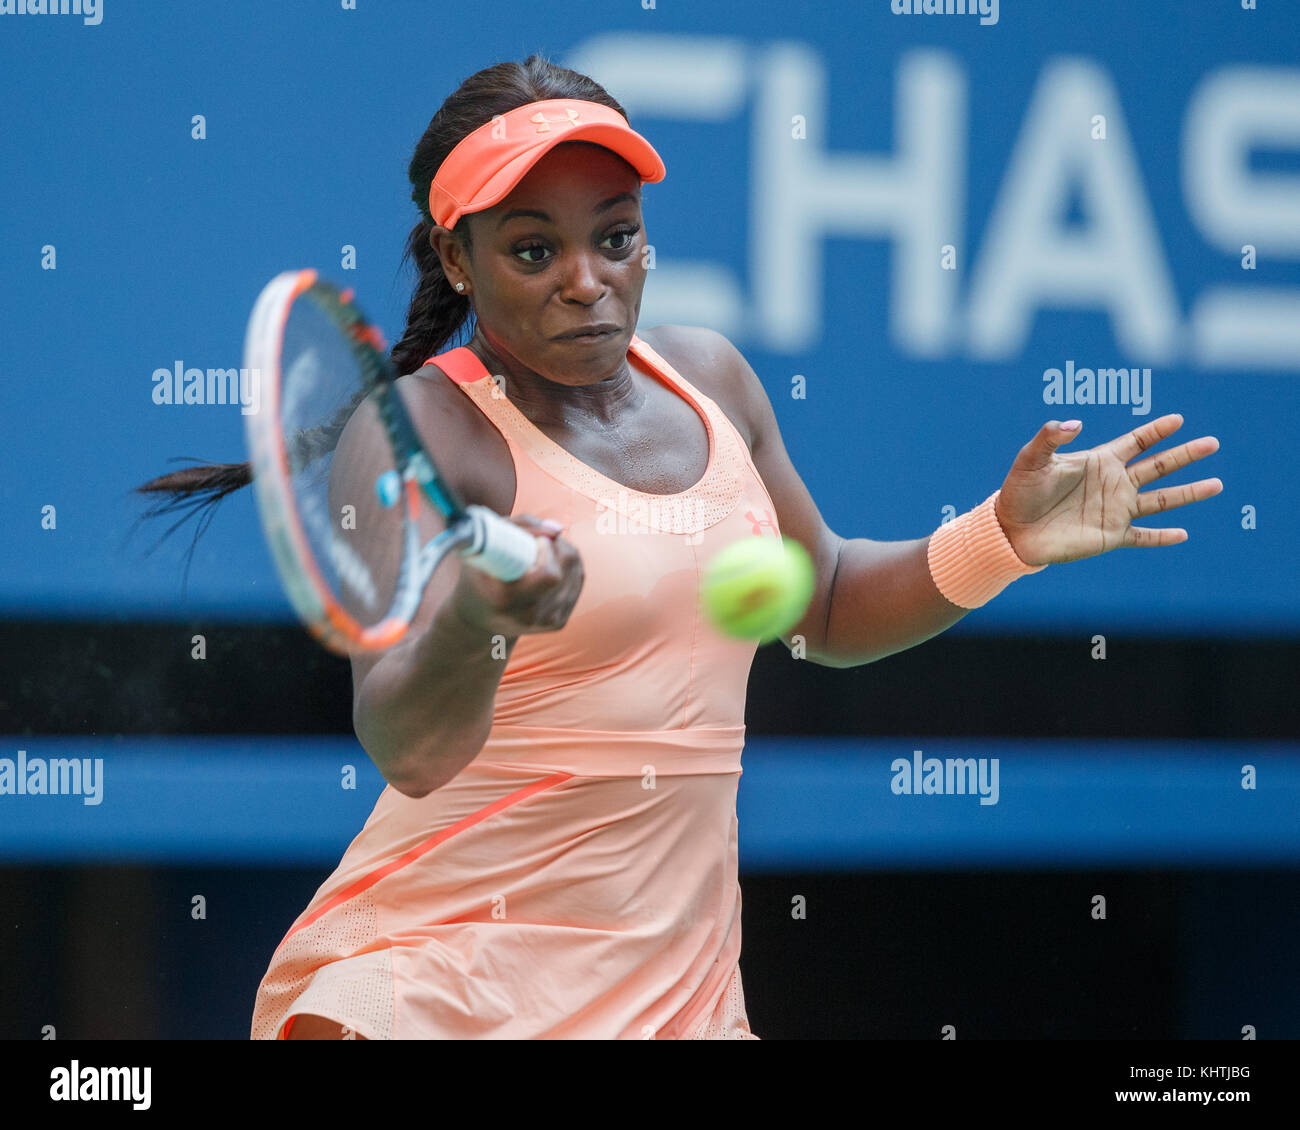 American tennis player SLOANE STEPHENS (USA) hitting a forehand shot during women's singles match at US Open 2017 Tennis Championship, New York City,  Stock Photo